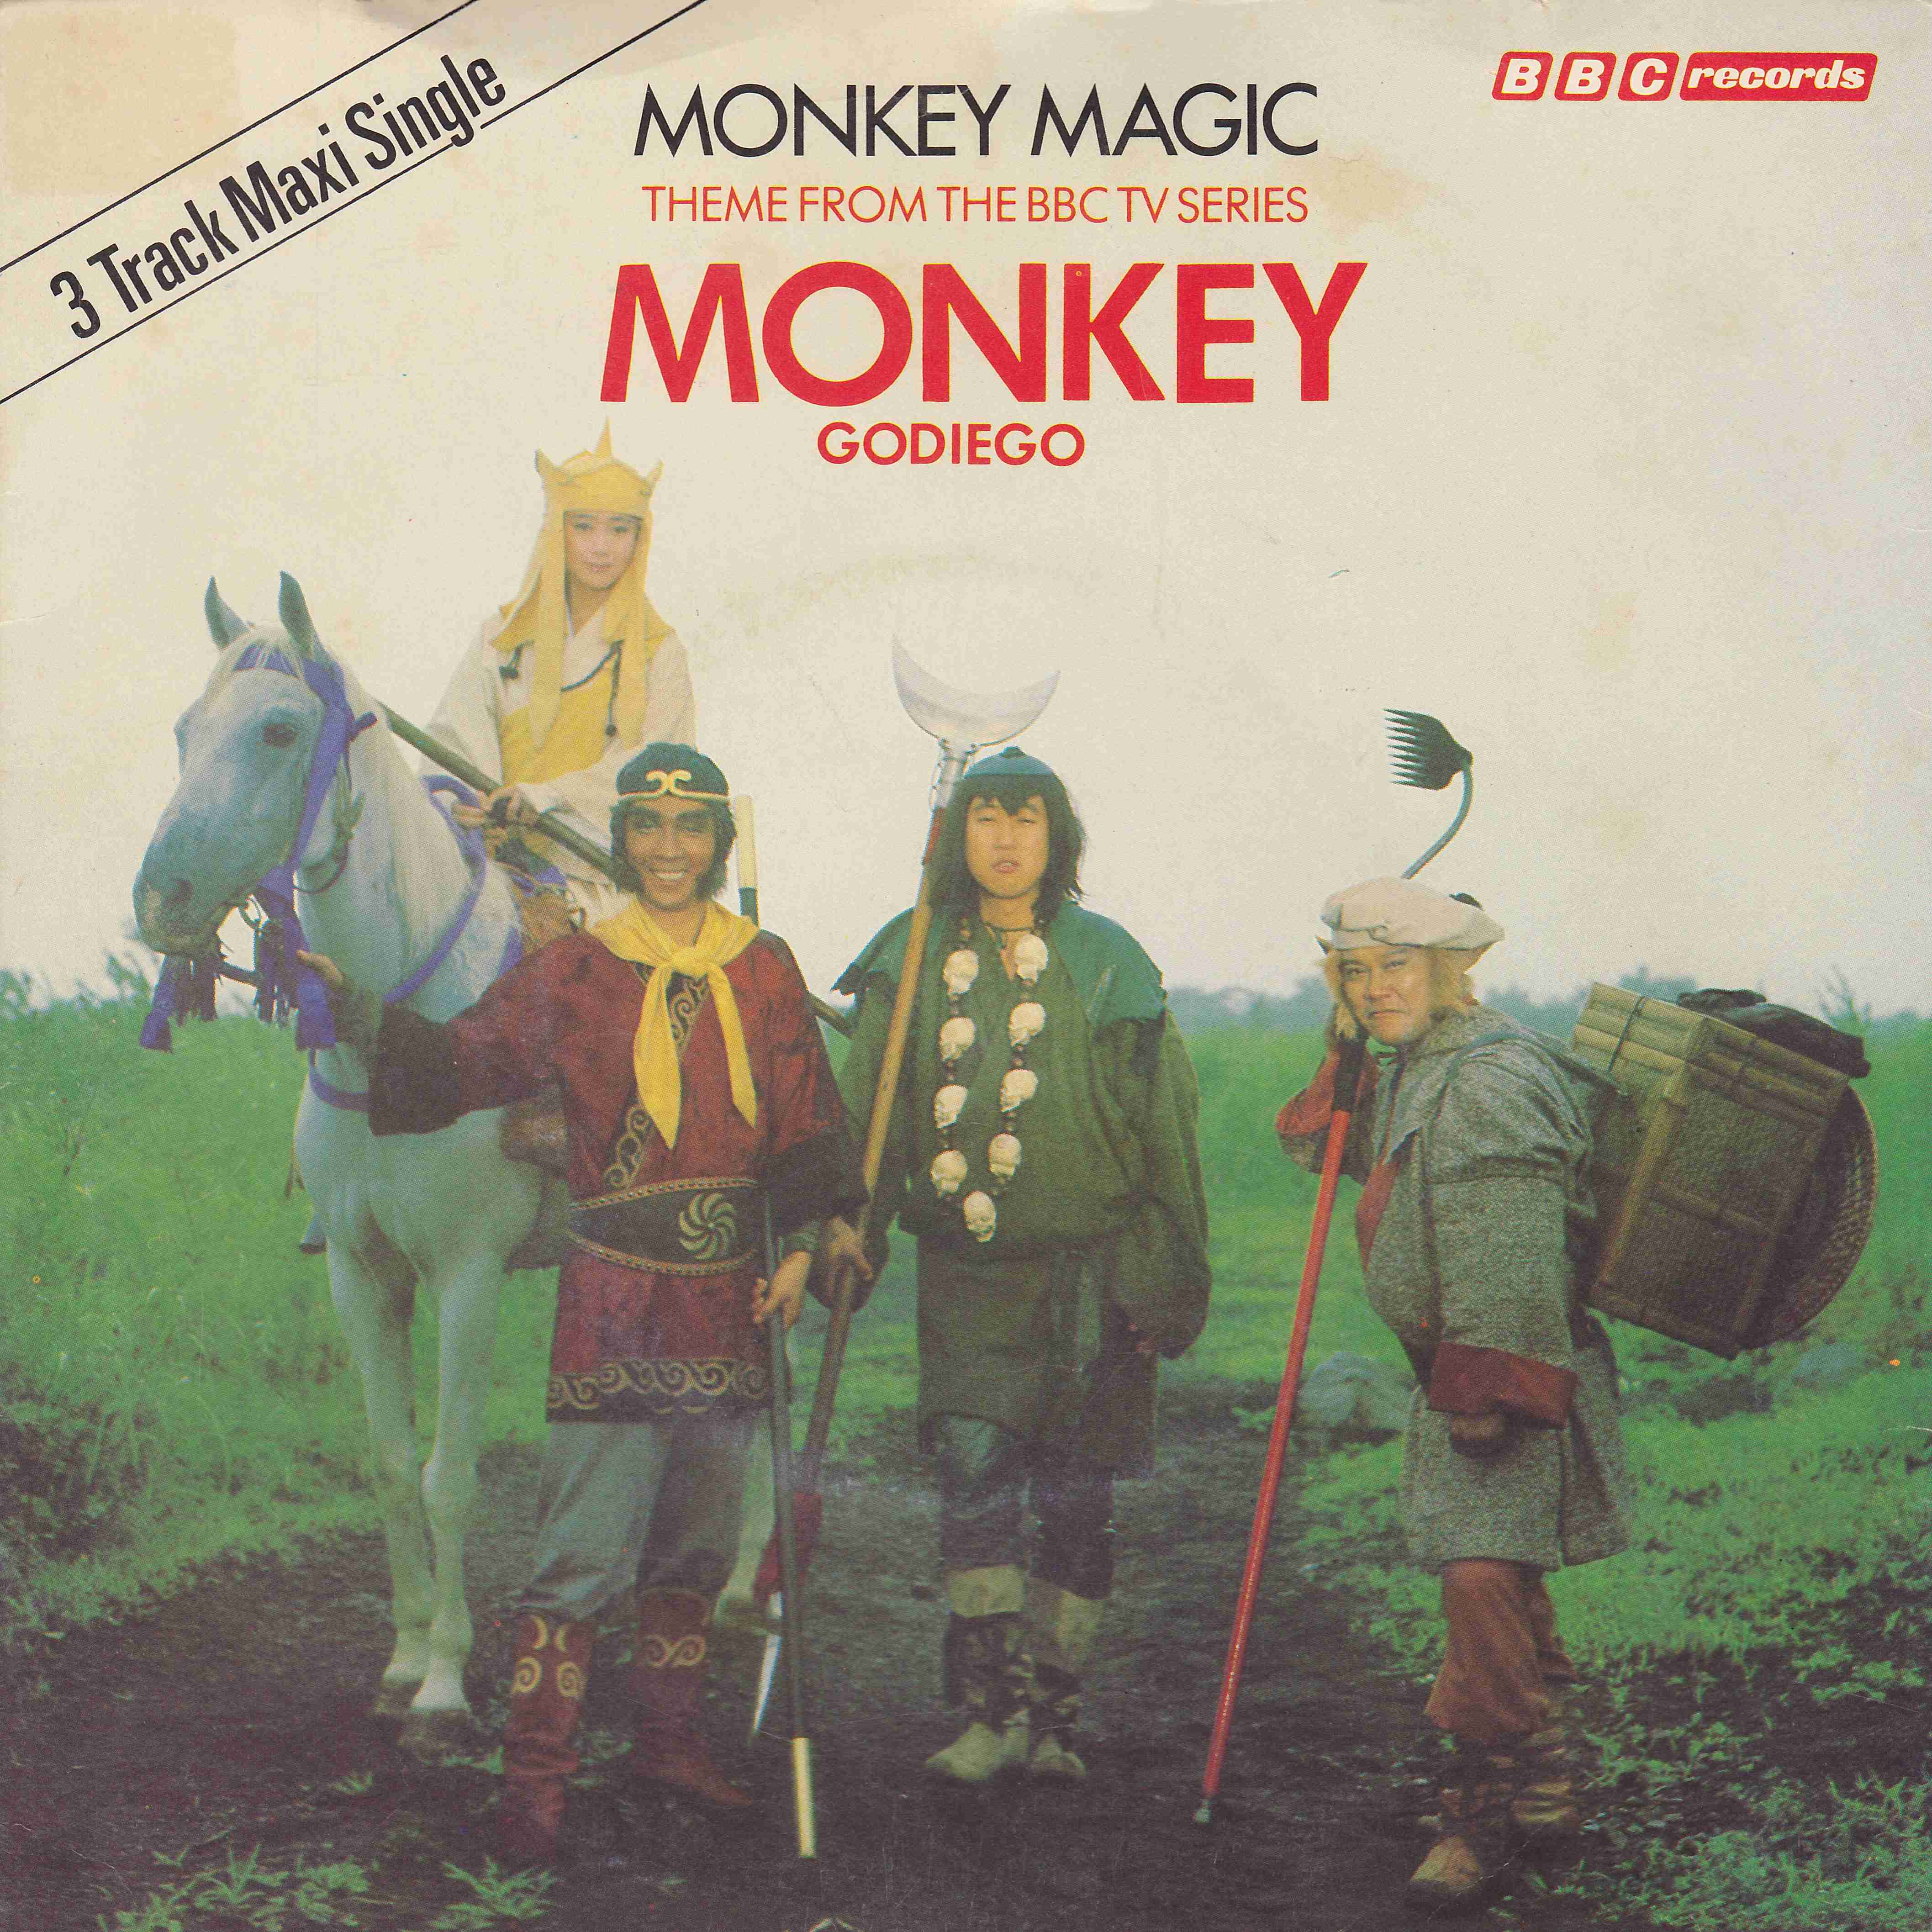 Picture of RESL 81 Monkey magic (Monkey) by artist Narahashi / Takekawa / Godiego from the BBC records and Tapes library